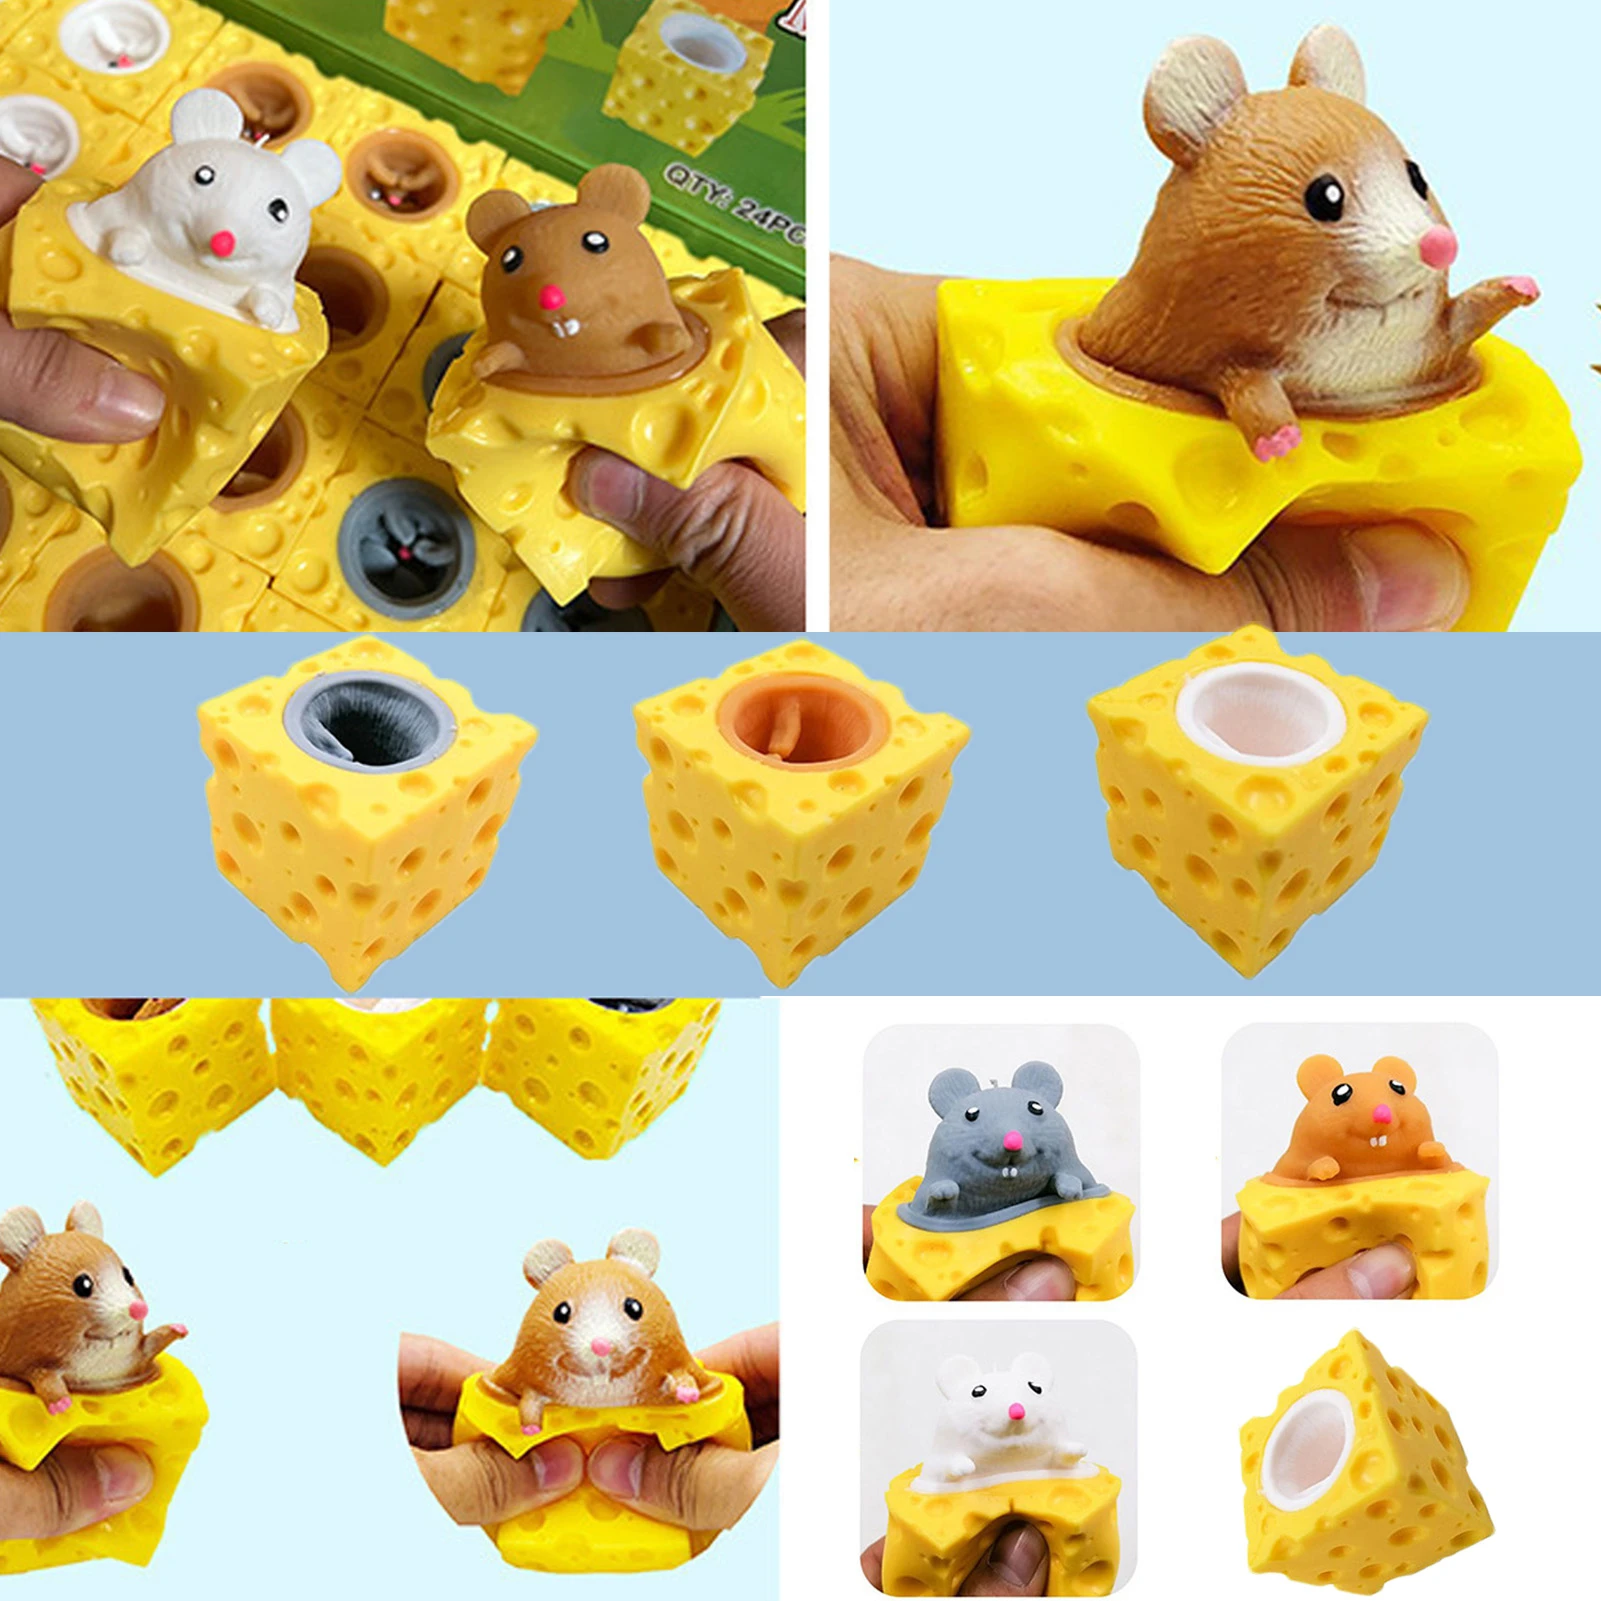 Squeeze Cheese Mice Toy Cheese Cup Mouse Pinch Toy Creative Animal Cheese Cup Toy Stress Relief Decompression Squeezing Toy For squeeze stress ball